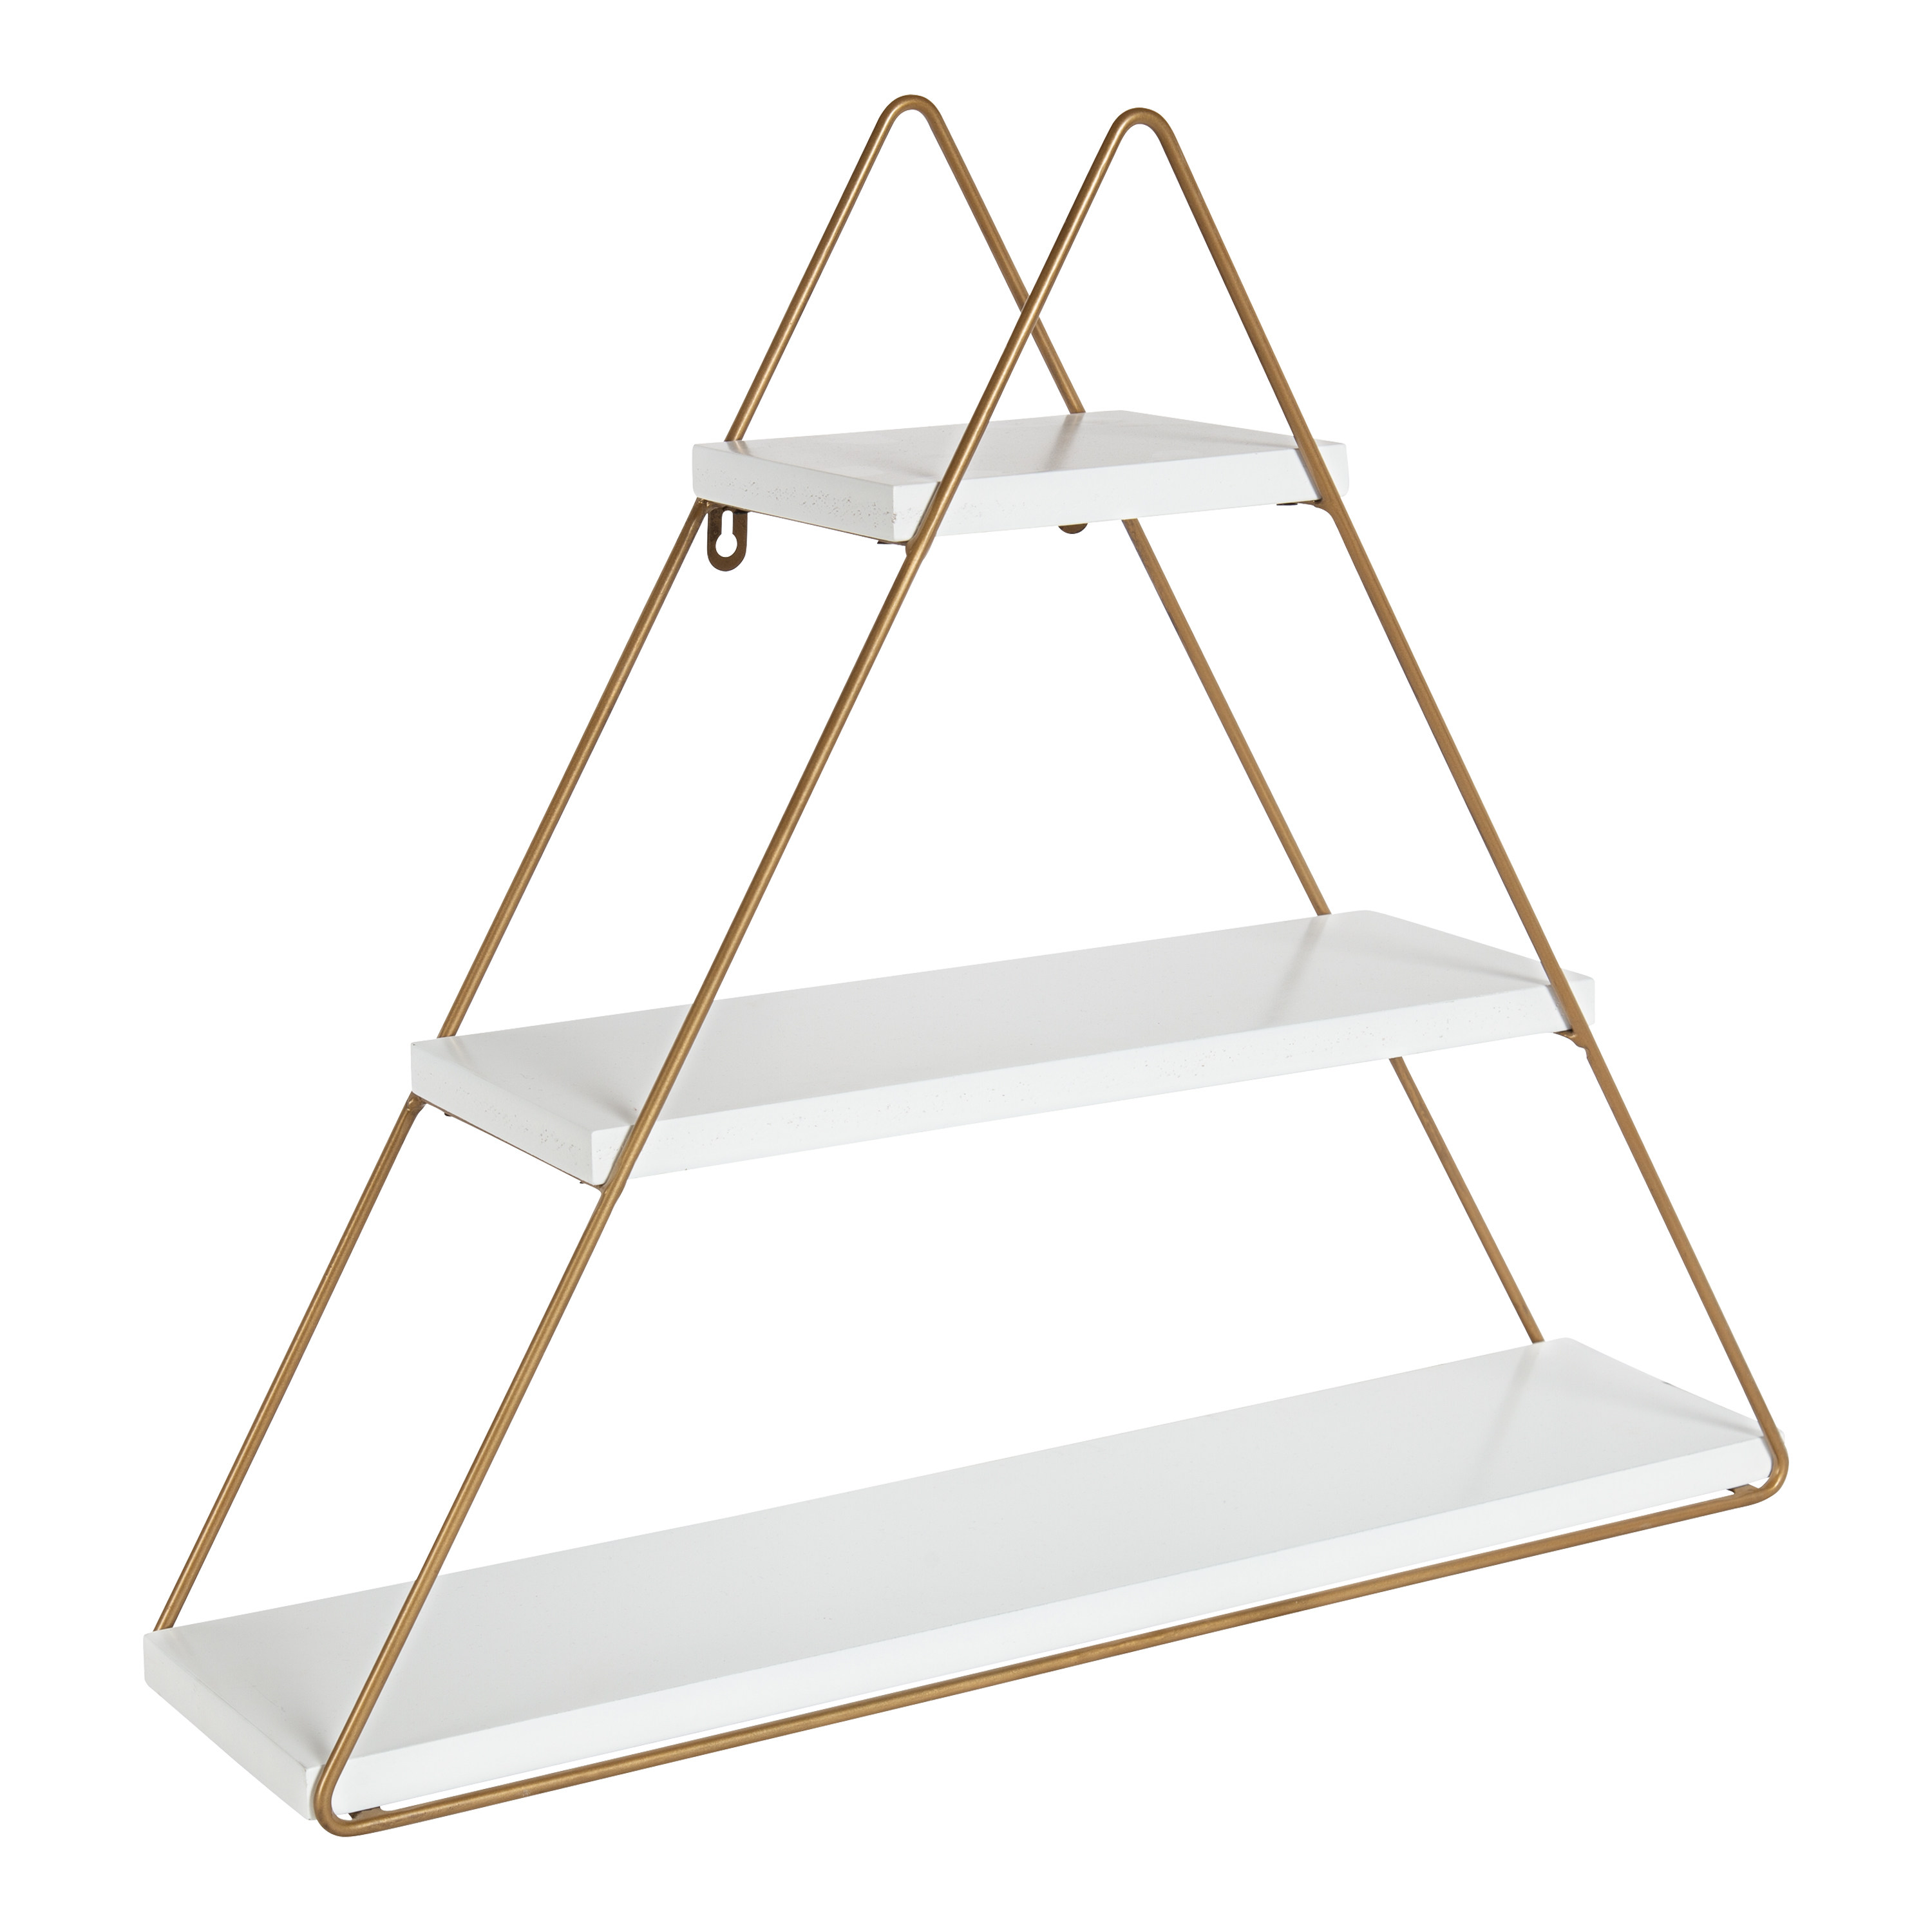 Kate and Laurel Tilde Metal Wall Shelves, 25 x 21, White and Gold, Three-Shelf Wall Organizer - image 1 of 6